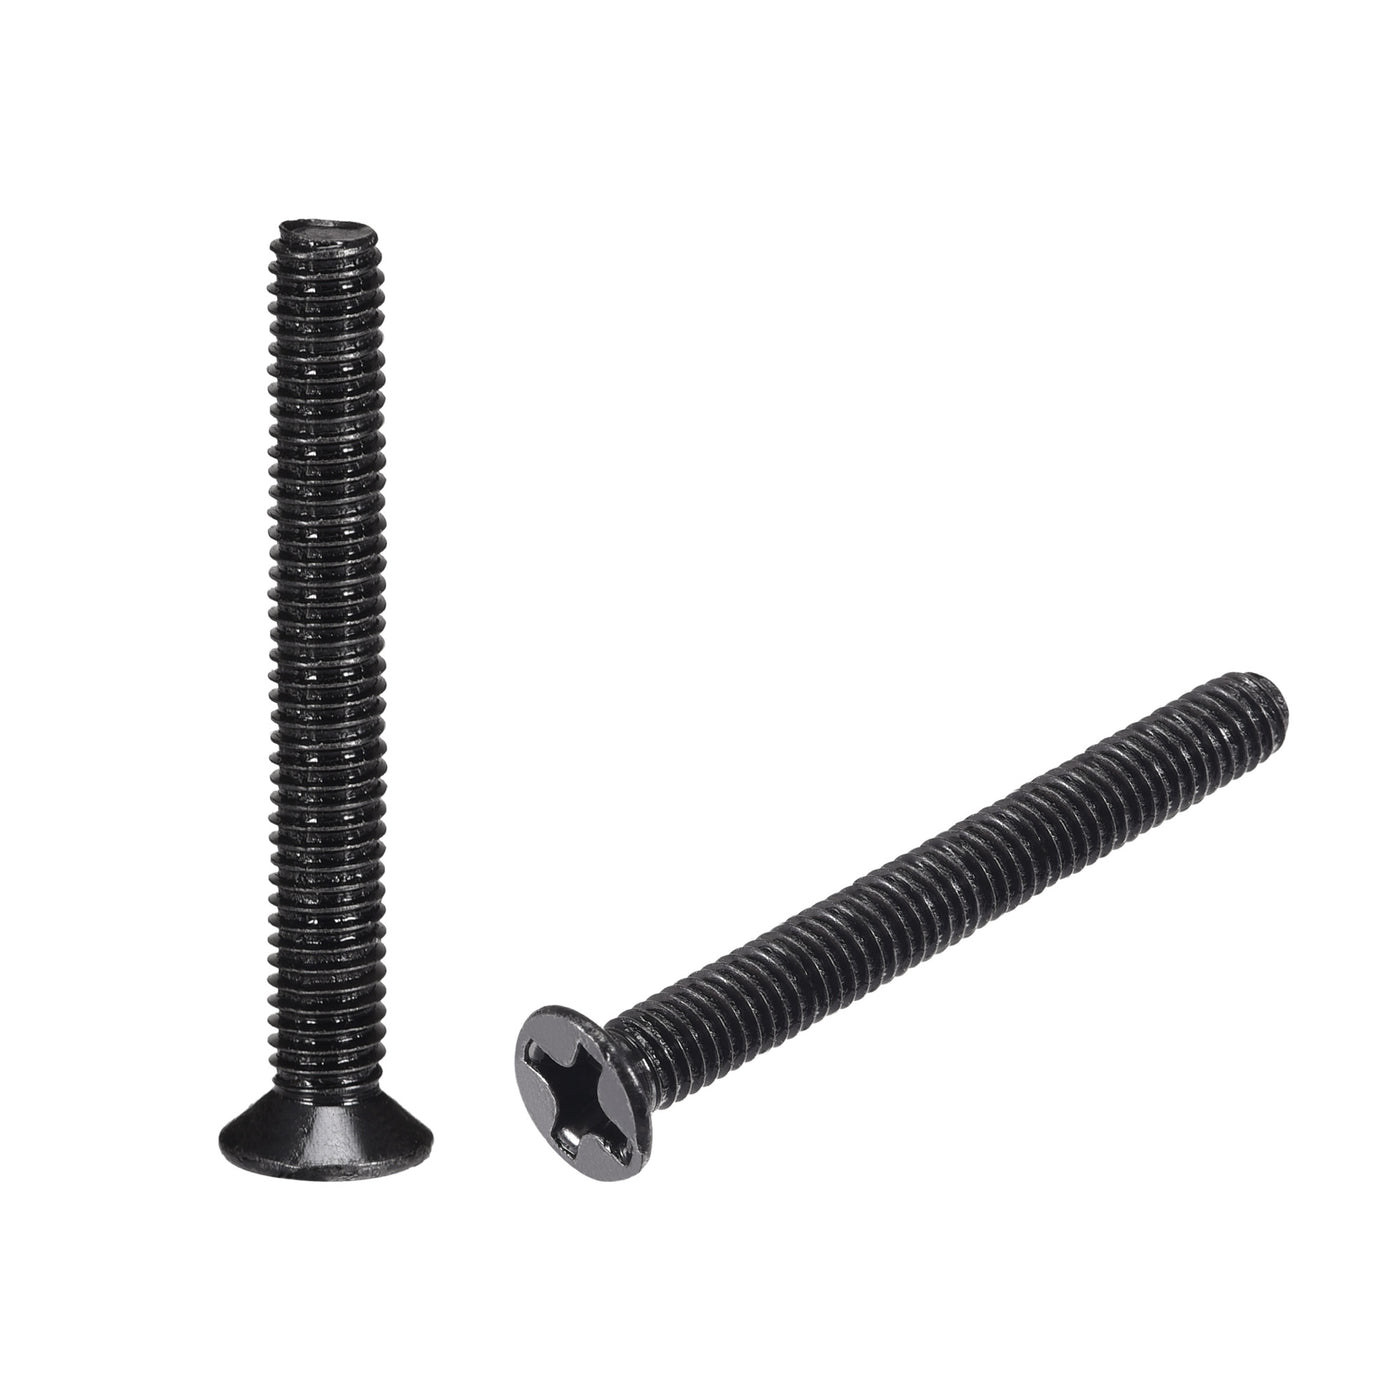 uxcell Uxcell M3 x 25mm Phillips Flat Head Screws Carbon Steel Machine Screws Black for Home Office Computer Case Appliance Equipment 50pcs